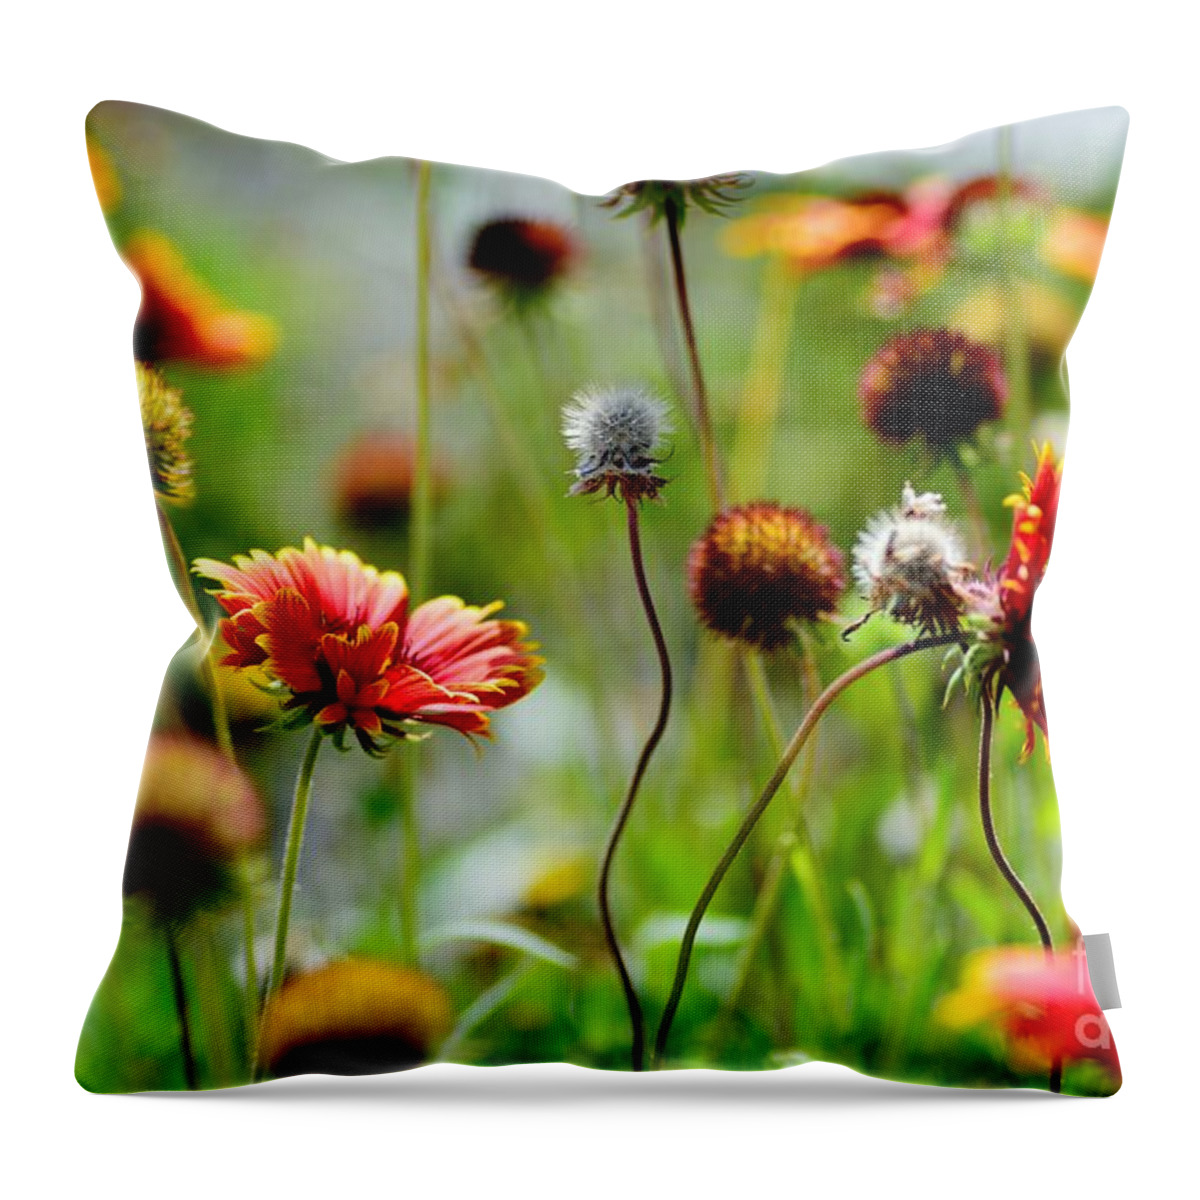 Indian Blanket Wildflowers Throw Pillow featuring the photograph Indian Blanket by Julie Adair